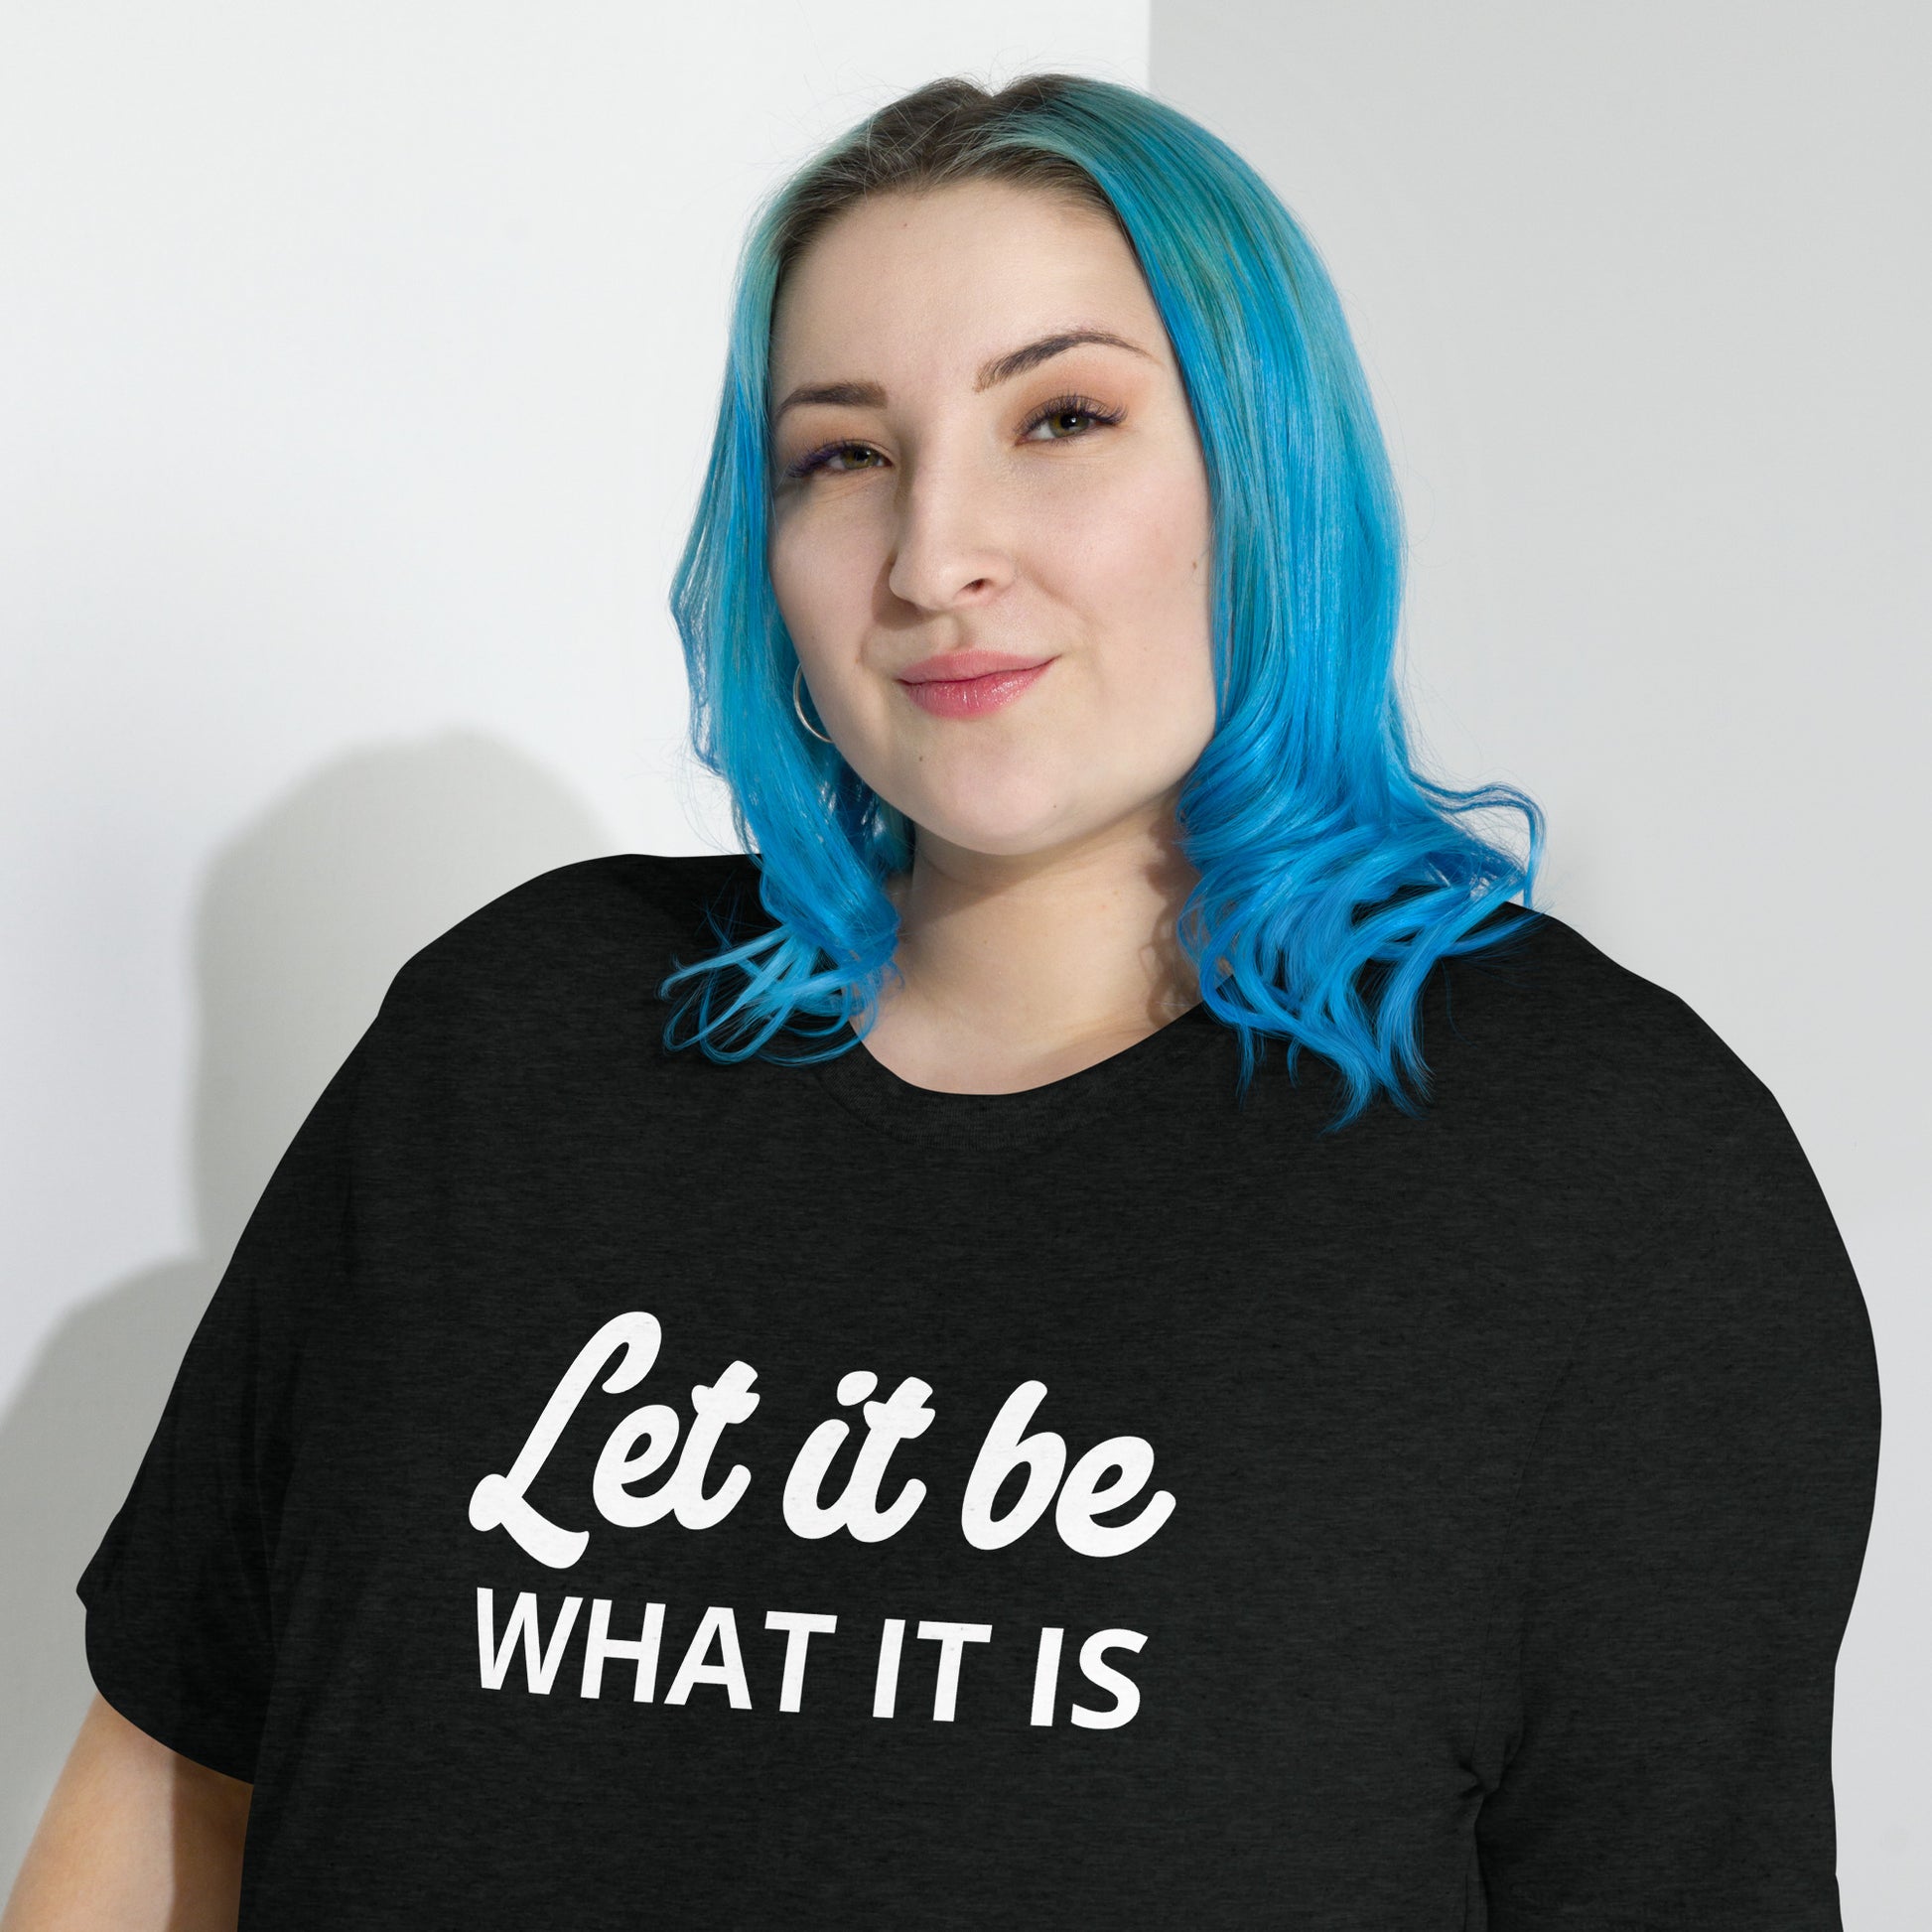 Motivate Merch Let it Be T-Shirt for the Artist who seeks the Spotlight